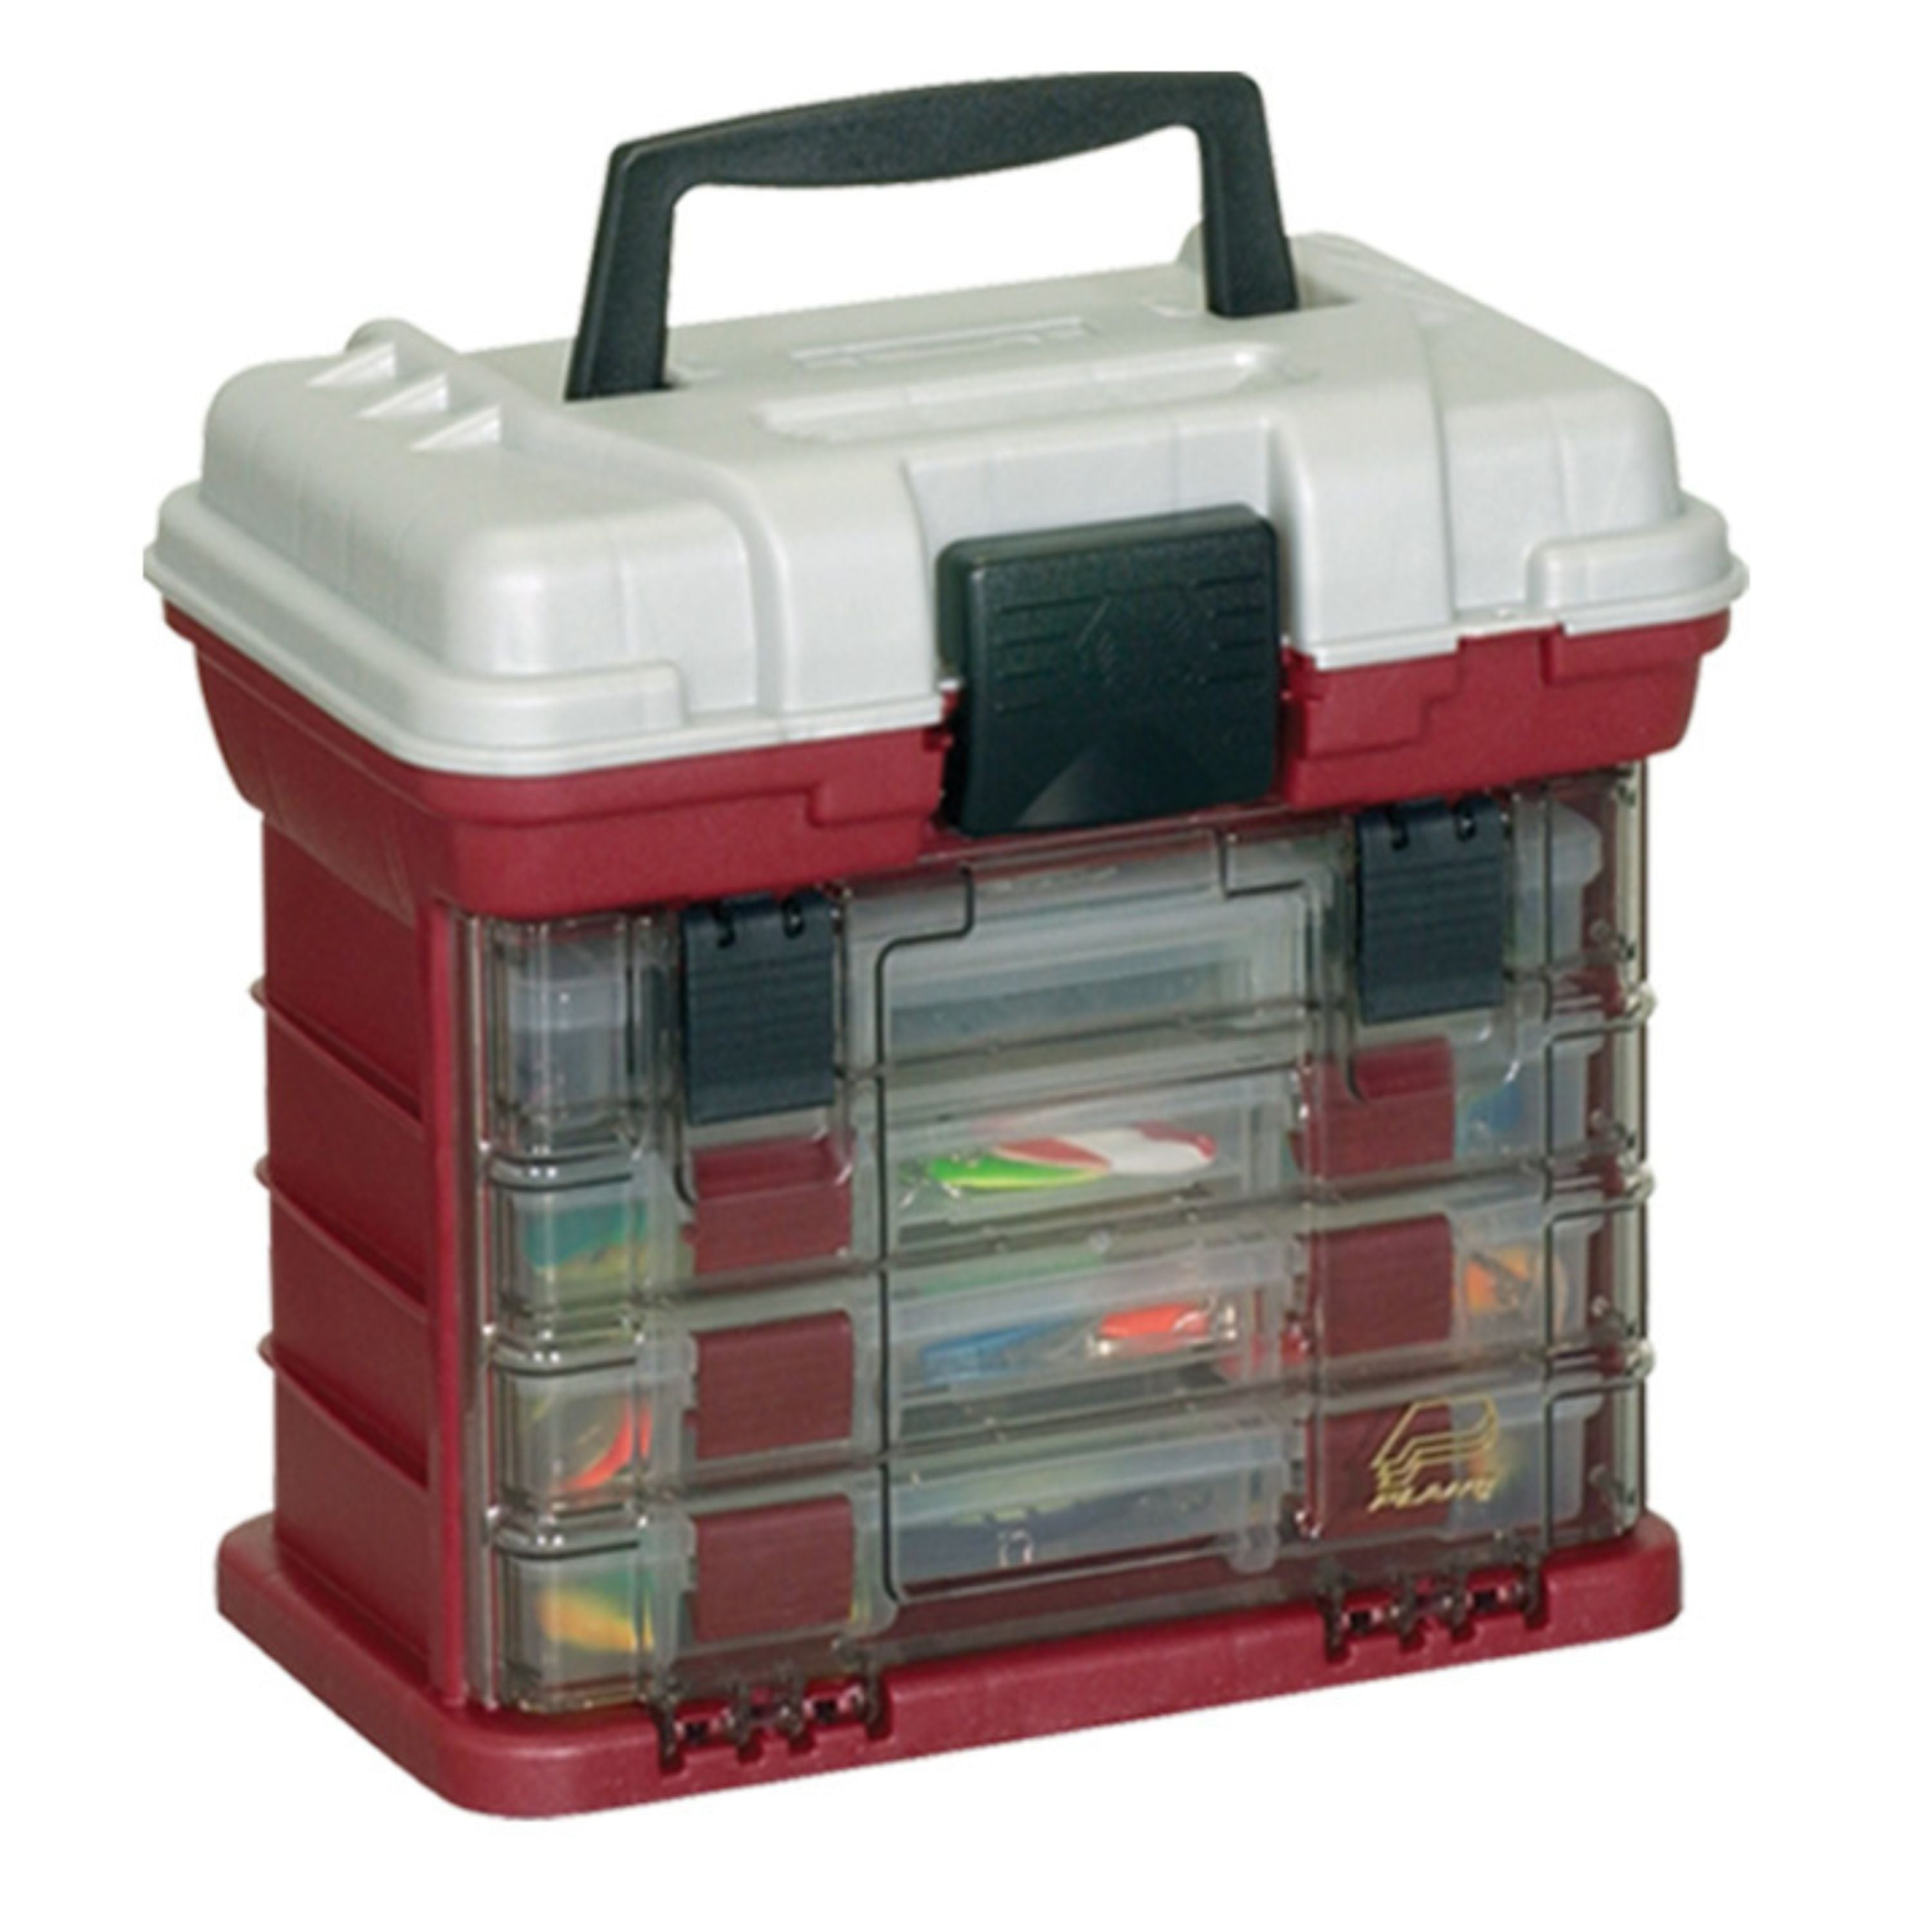 "Guide Series StowAway rack system" Tackle box